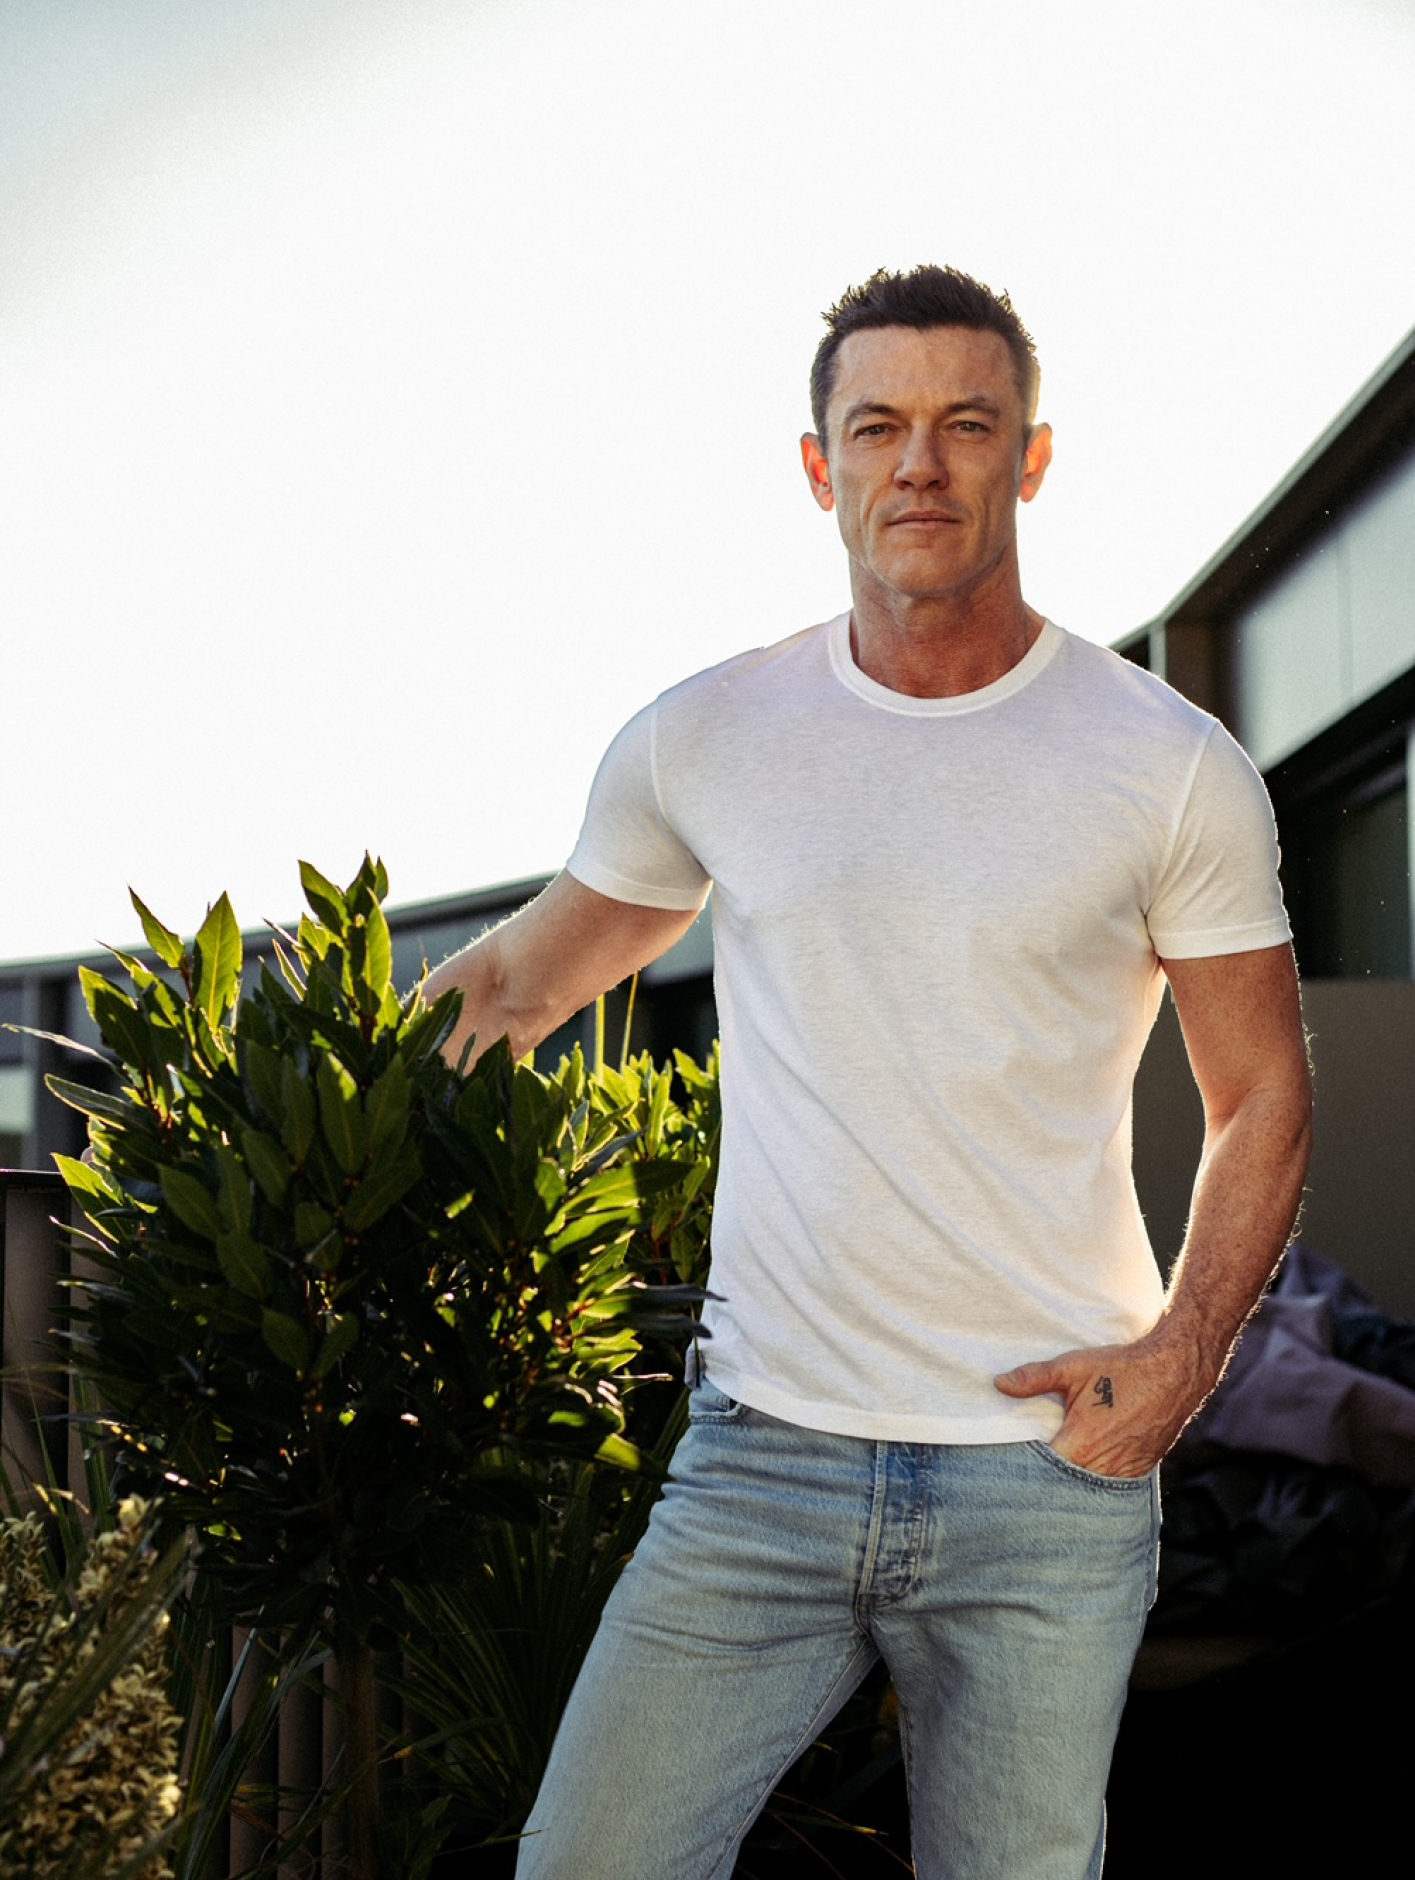 The classic t-shirt is a go-to for Luke Evans, just at its was for so many of his Golden Era Hollywood forebears